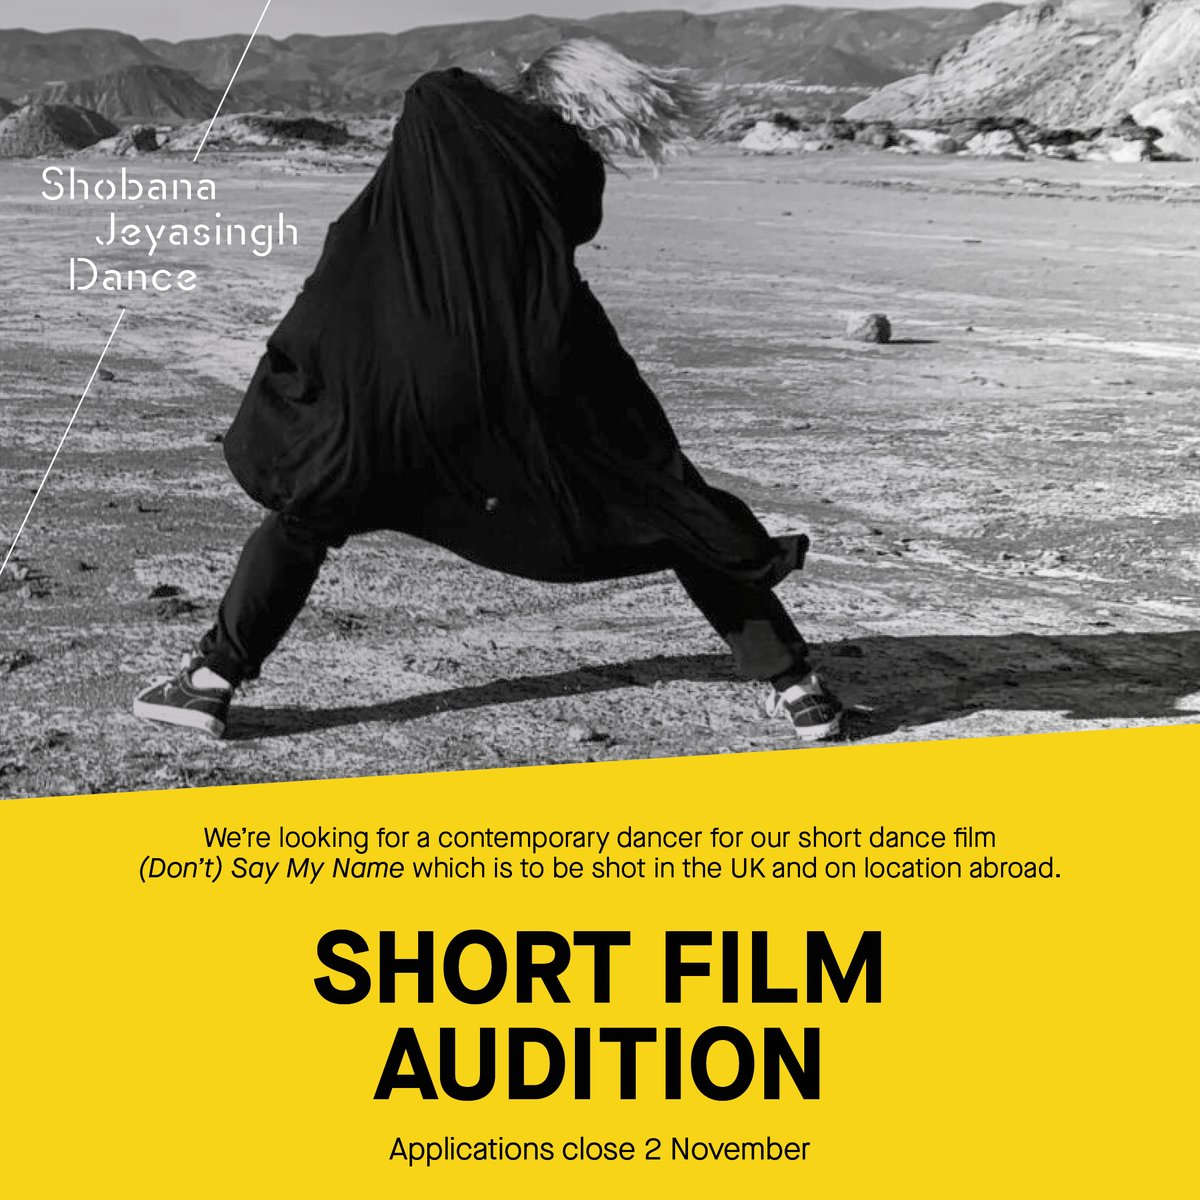 DANCE AUDITION ANNOUNCEMENT ❗ We’re looking for a female contemporary dancer for our short dance film which is to be shot in the UK and on location abroad. Auditions close 2 November - find out more and how to apply 👉 shobanajeyasingh.co.uk/news/short-fil… #Dance #DanceAuditions